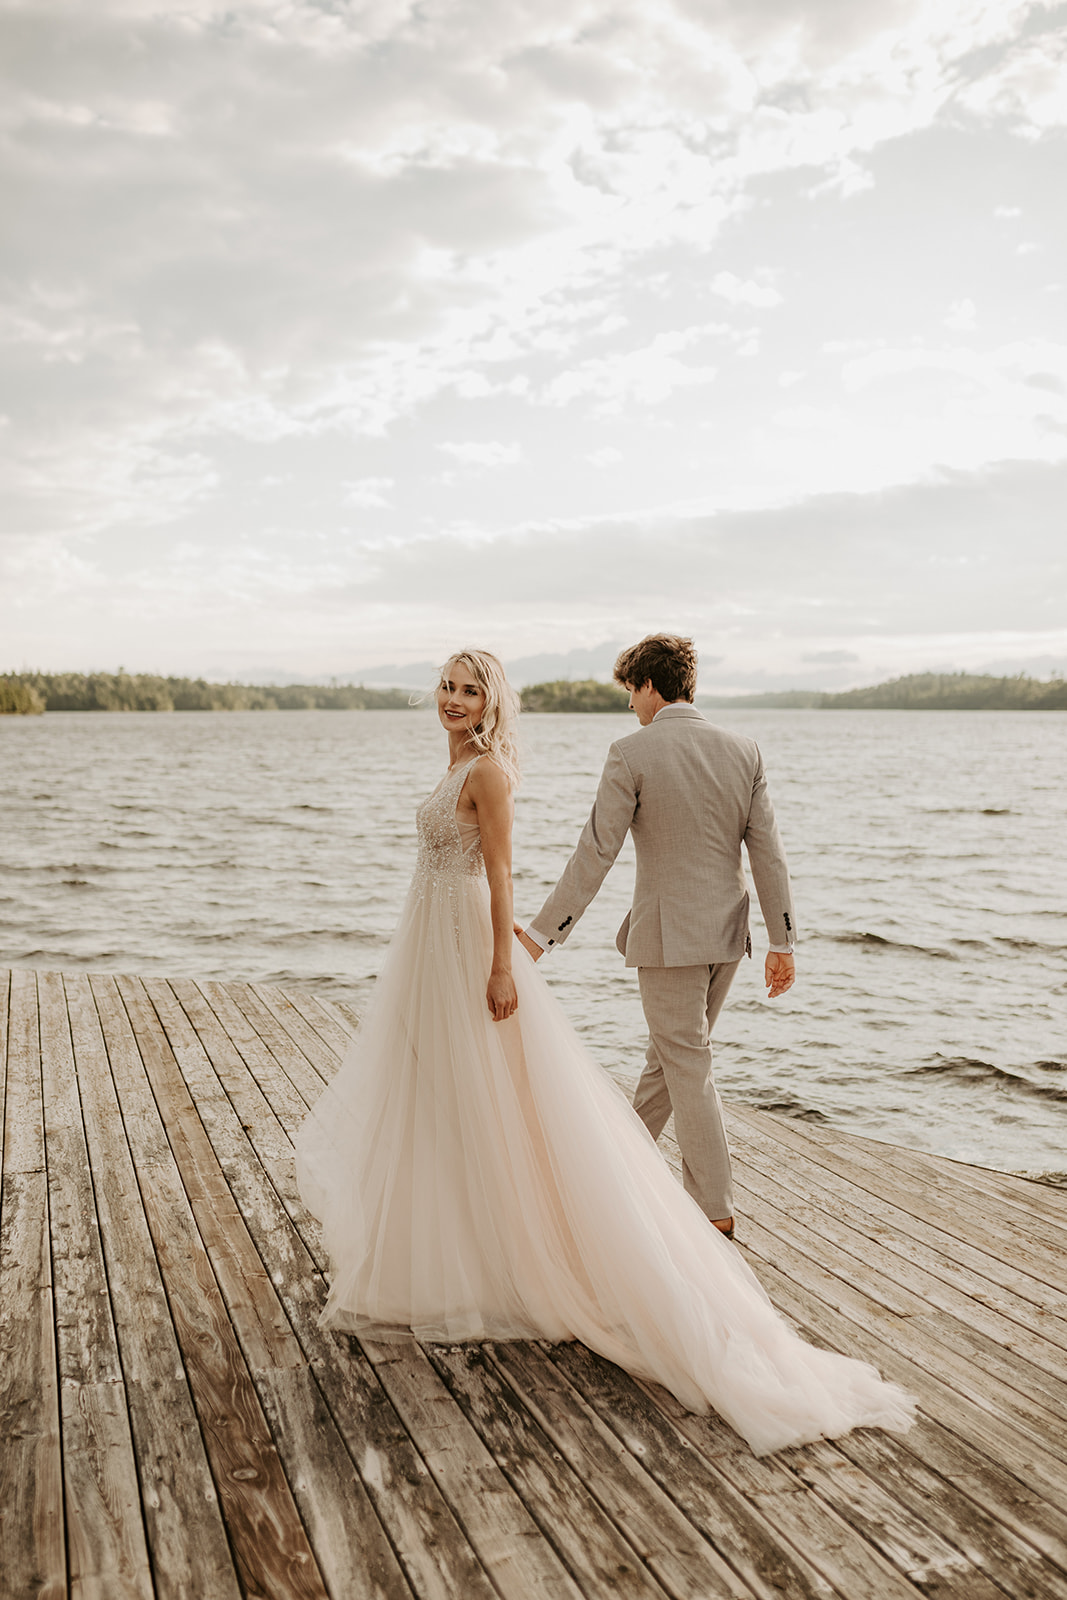 Bride and groom on dock during their ceremony during their wedding in Lake of the Woods, Kenora, Ontario